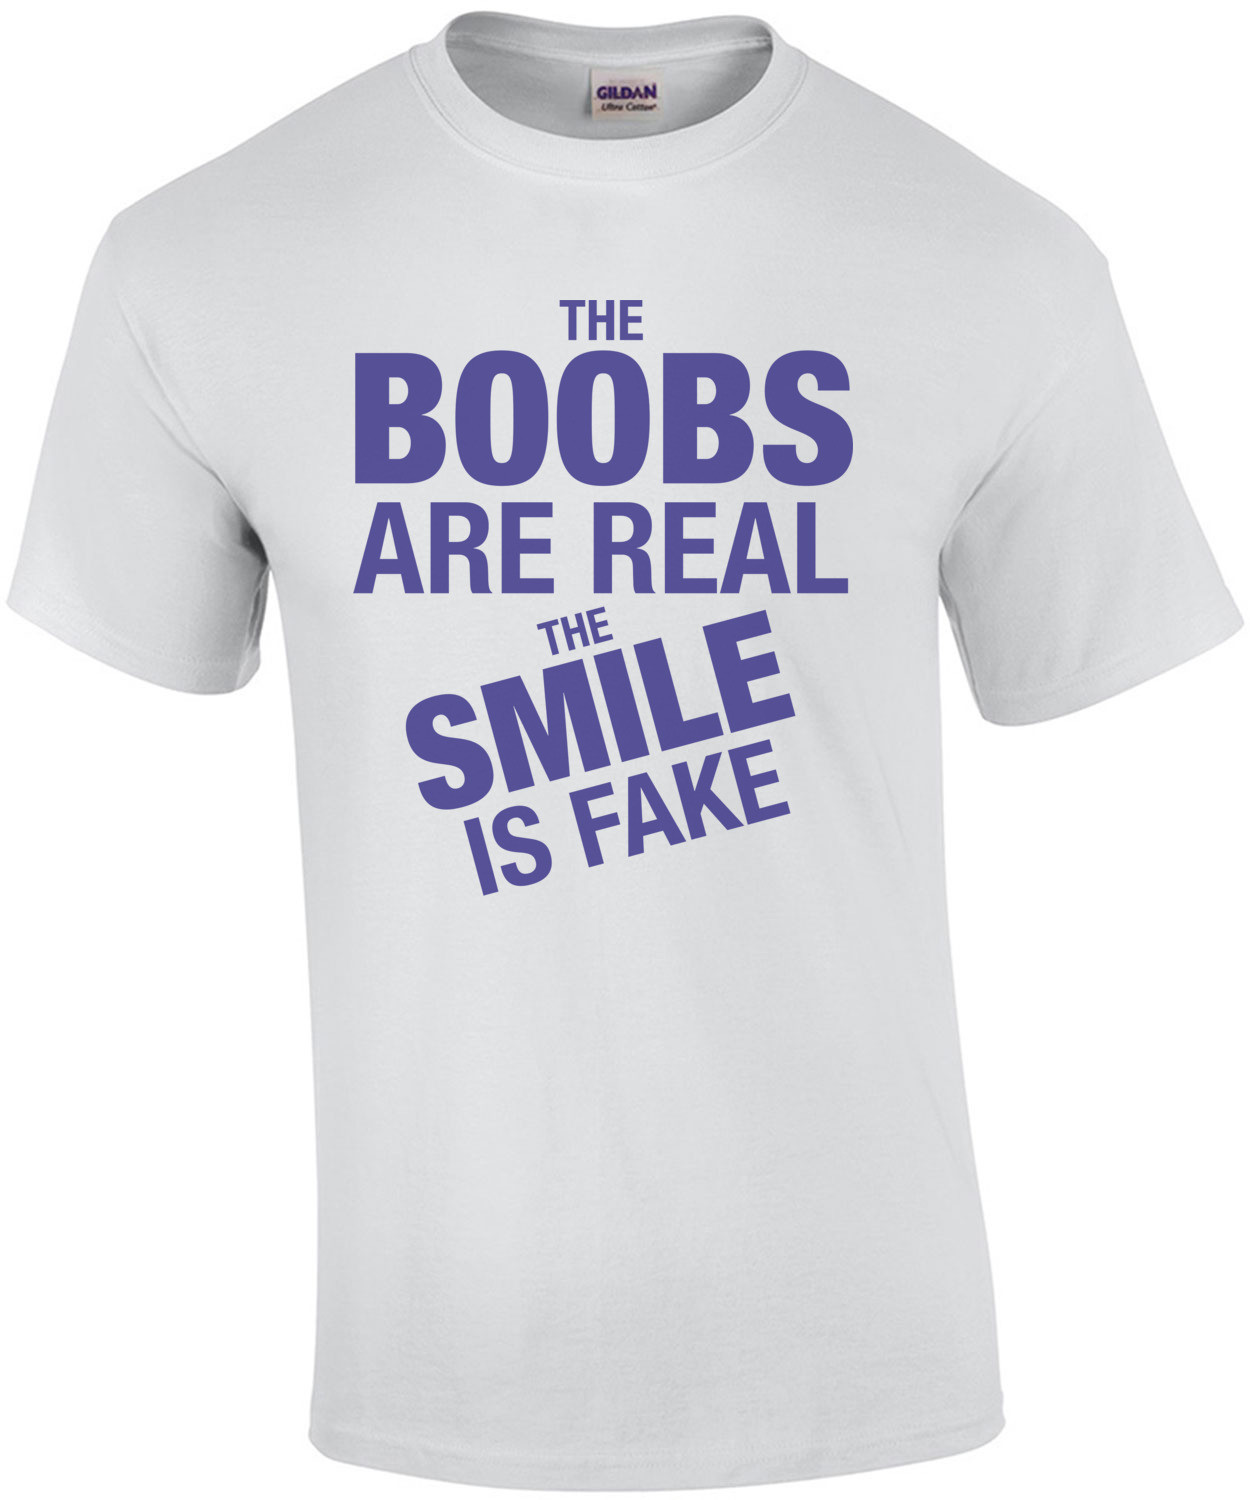 The Boobs Are Real, The Smile Is Fake